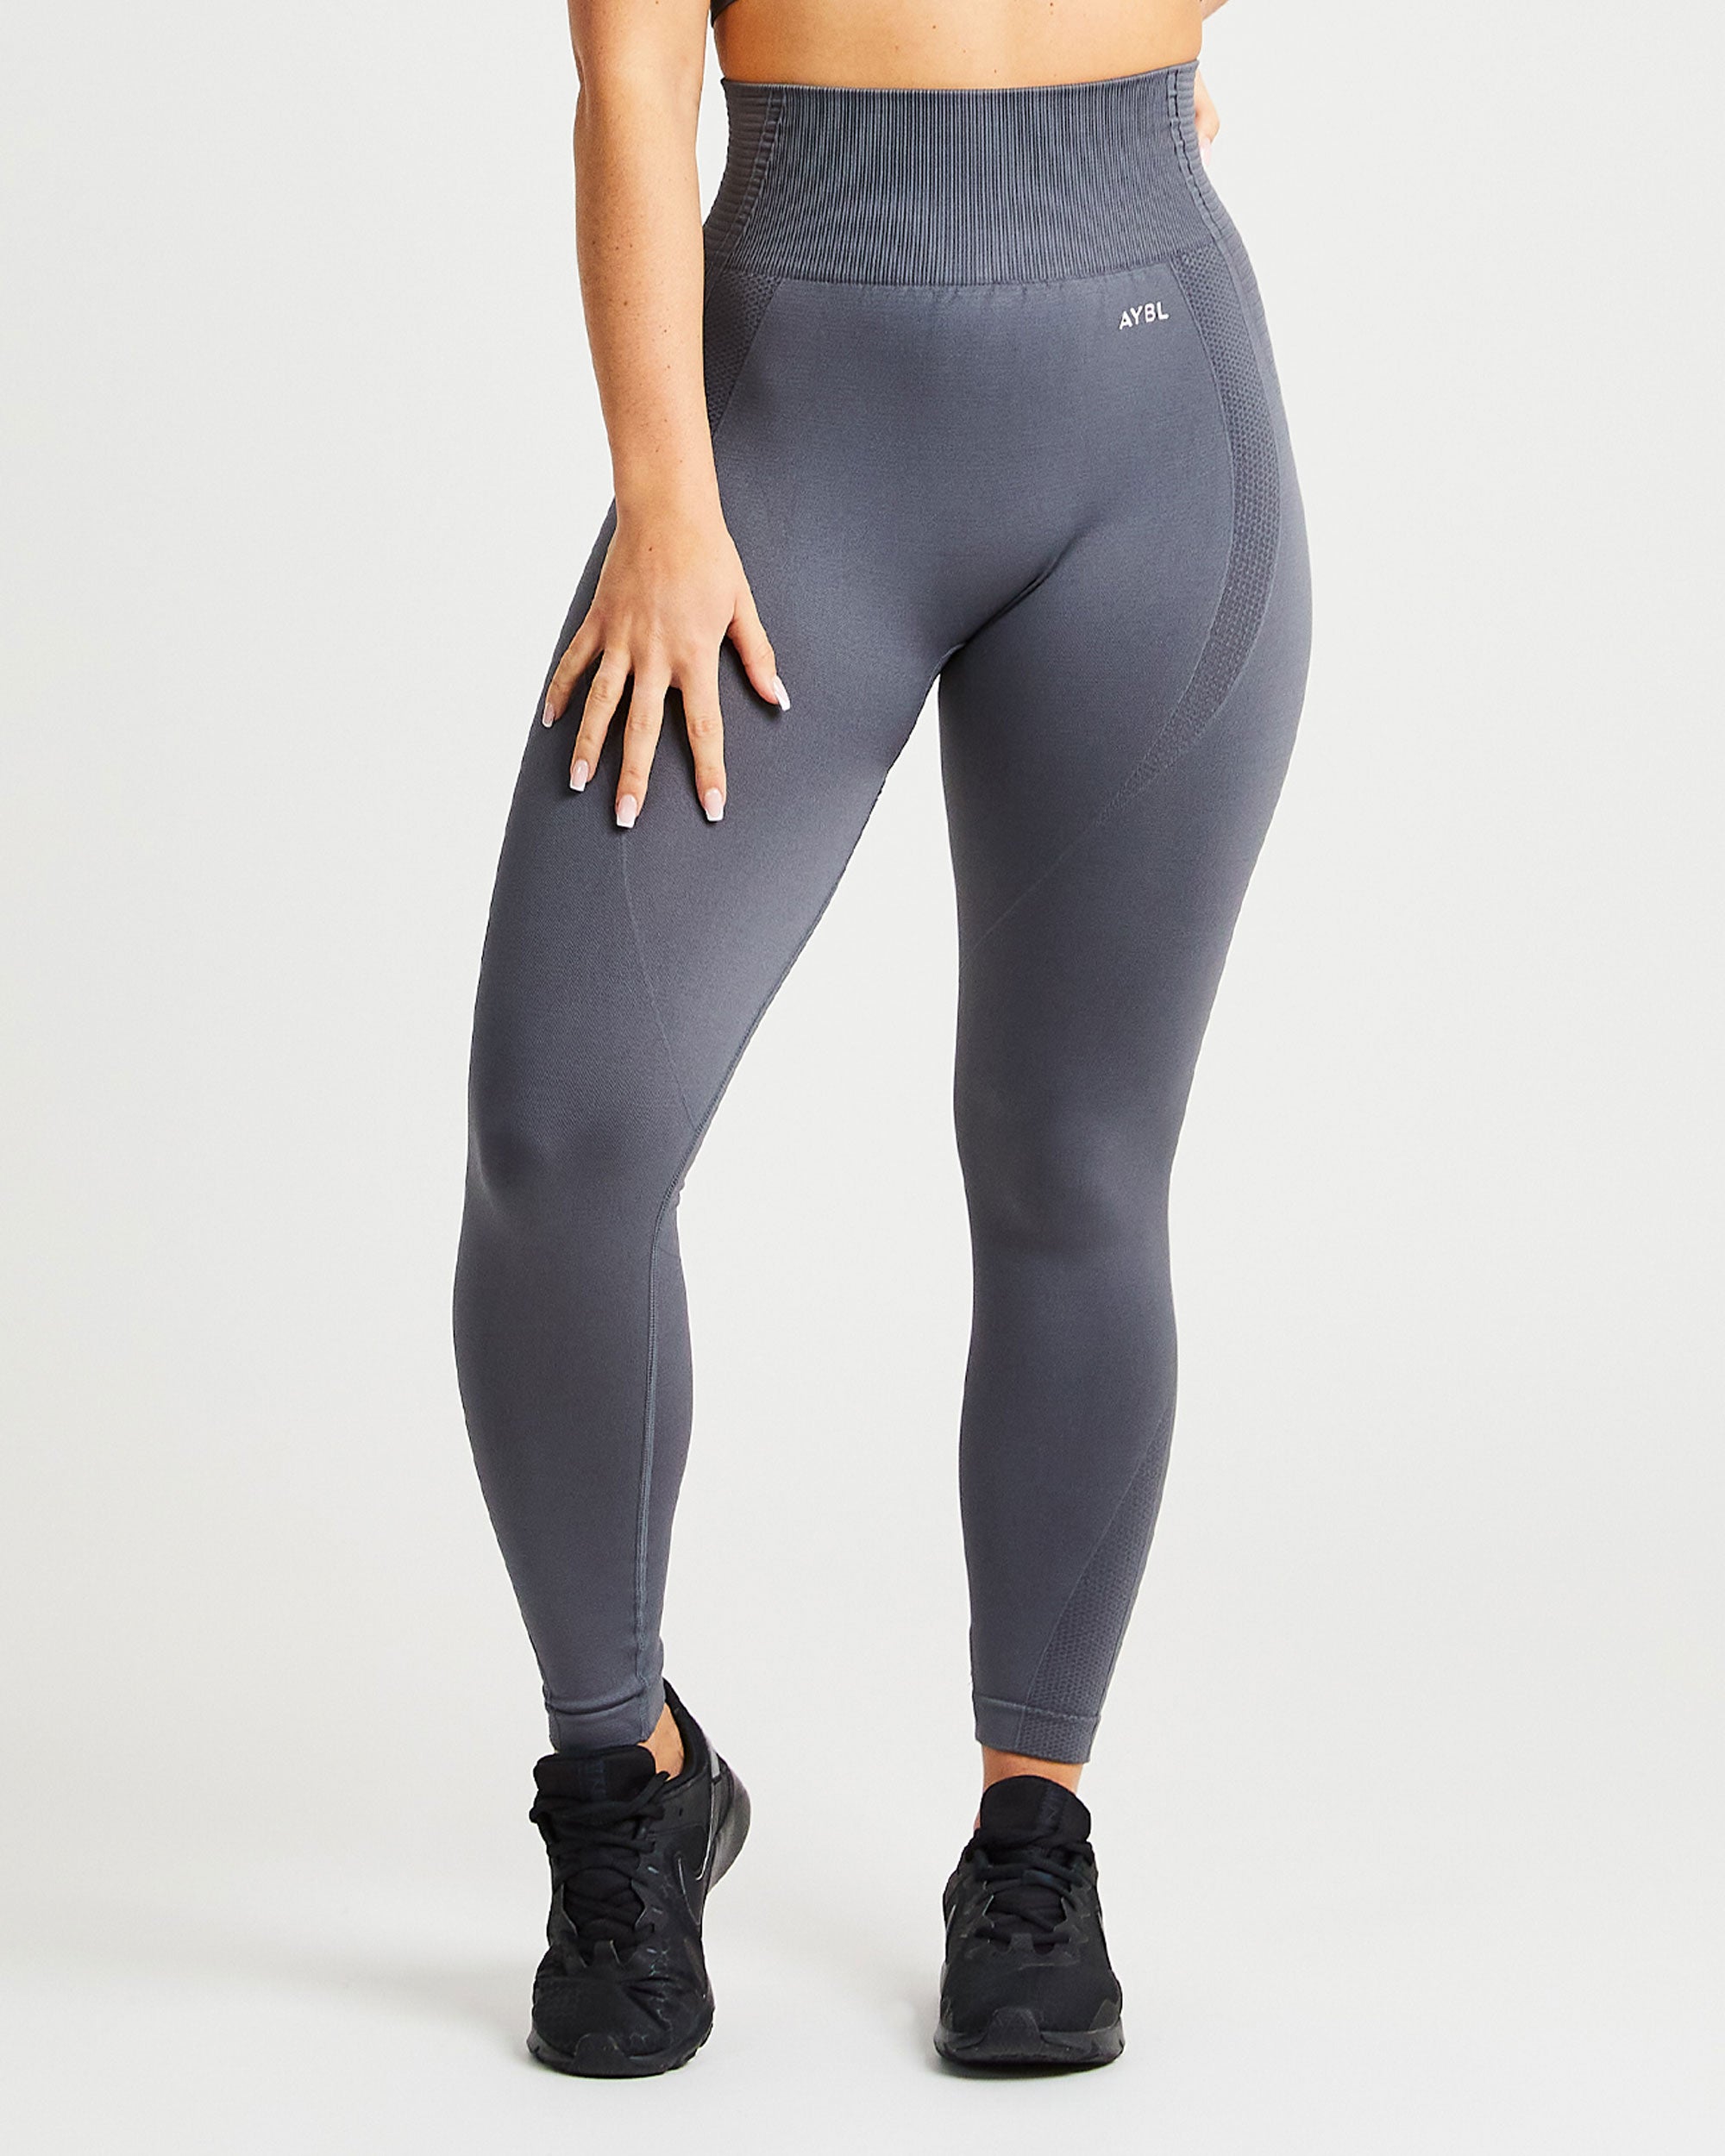 Black Wide Waistband Leggings With Pocket · Filly Flair